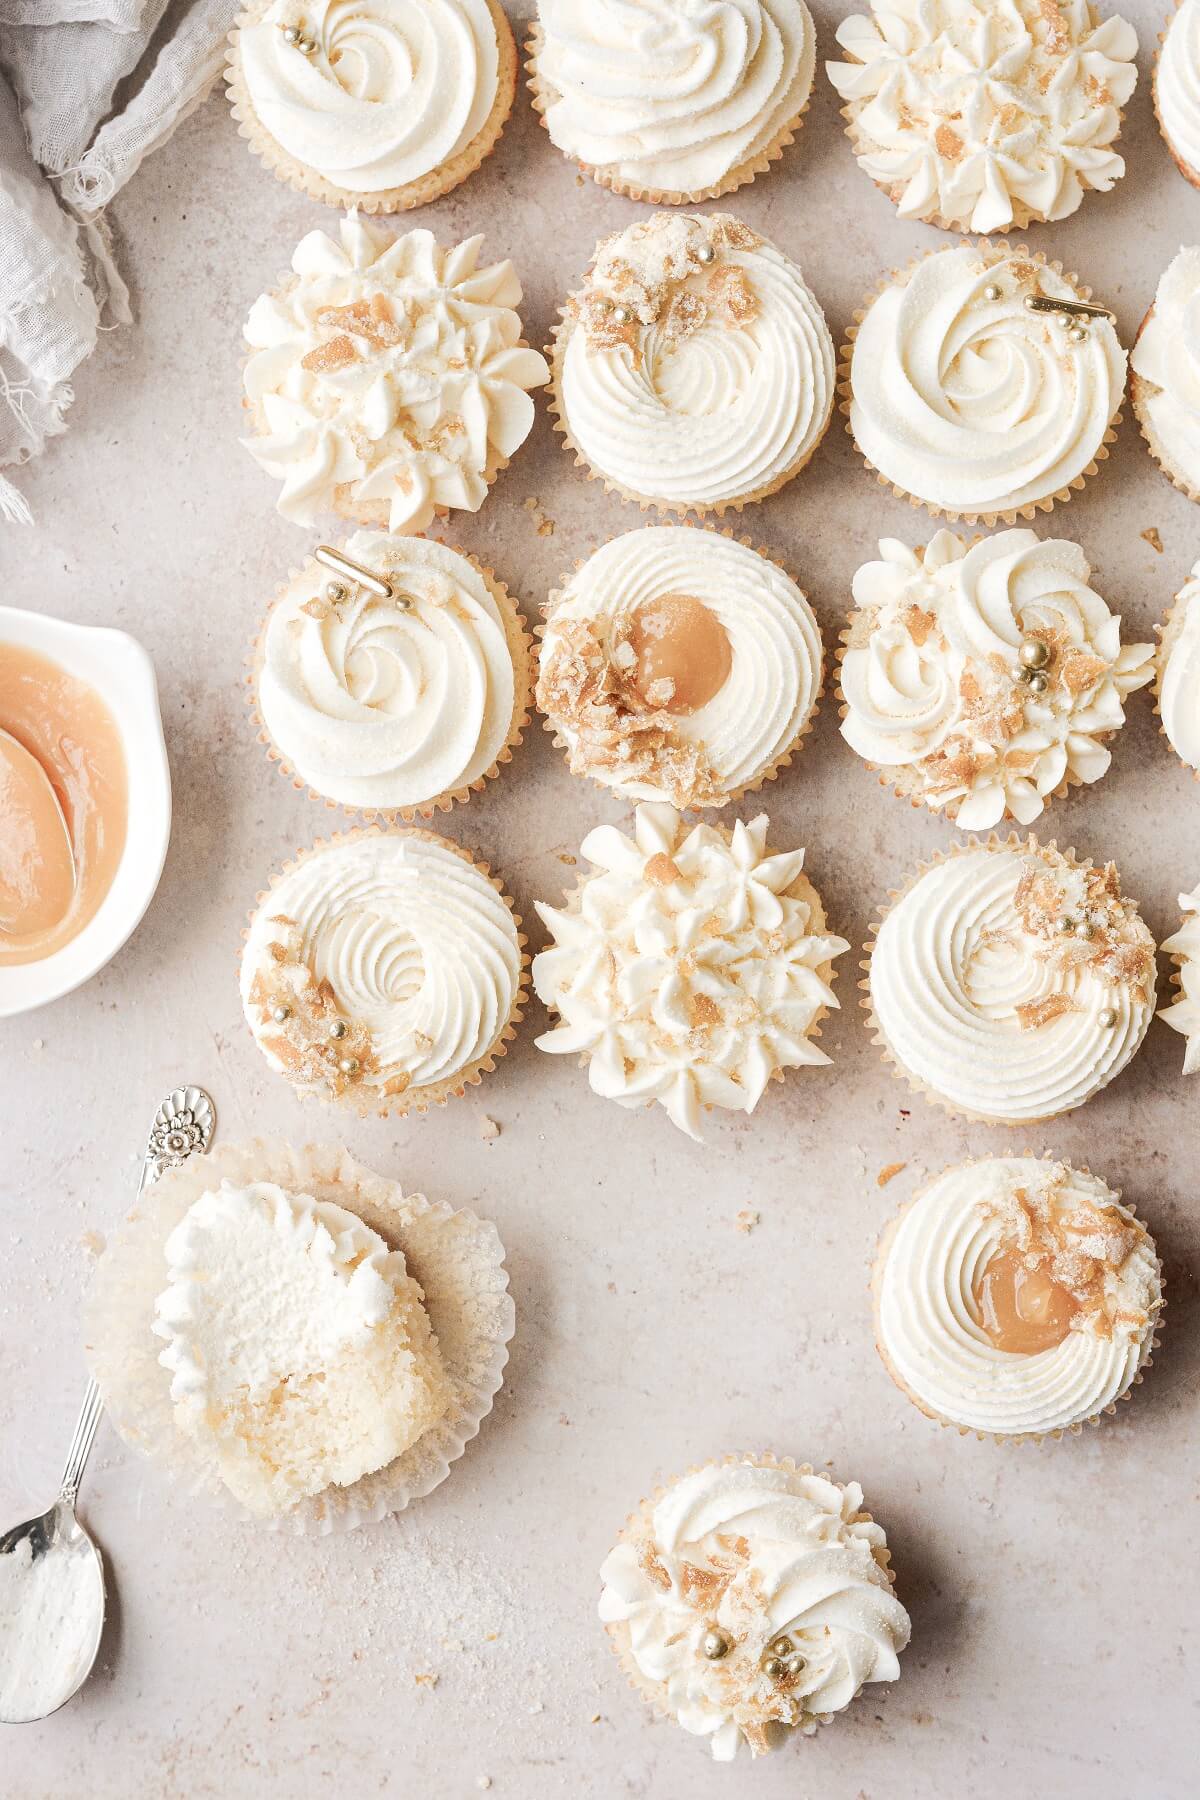 Lemon cupcakes decorated with buttercream, gold sugar pearls and candied lemon peel.